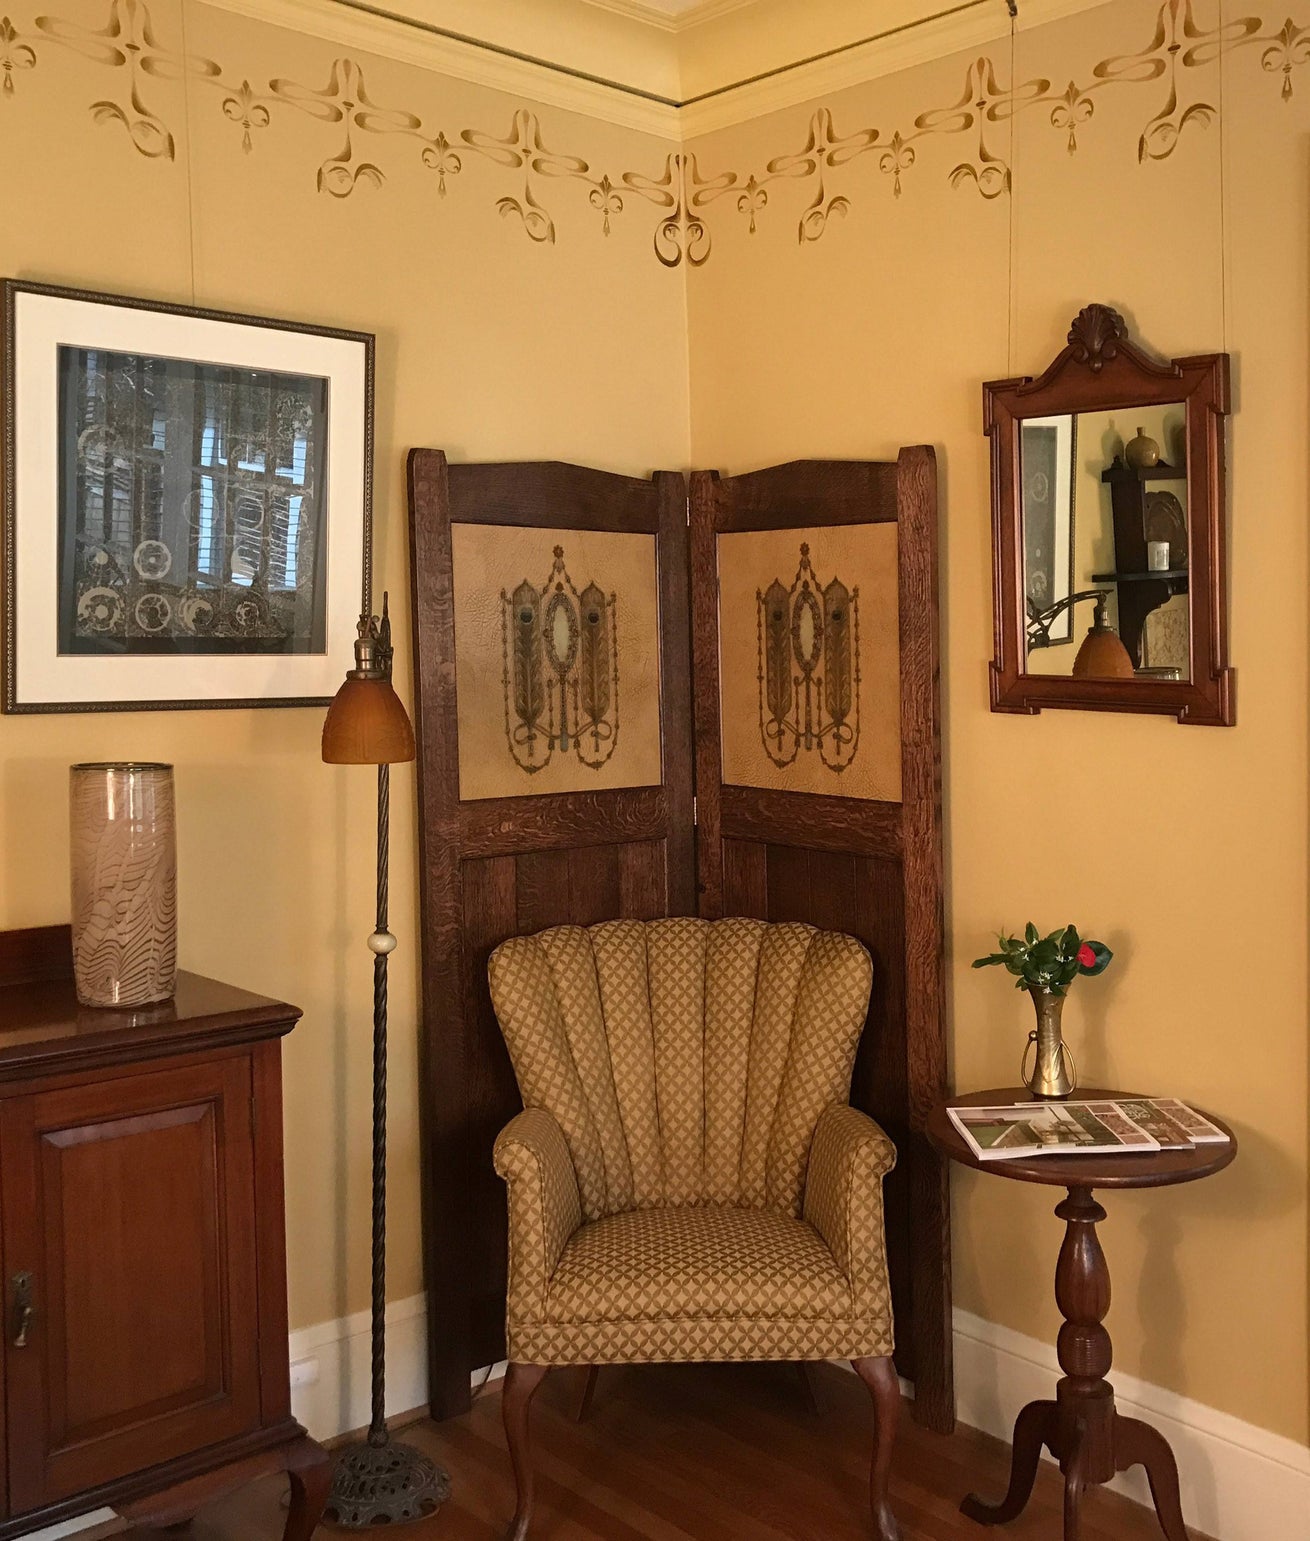 New Arts & Crafts Folding Screen with Antique Wallpaper Panels - Tooled “Leather” Peacock Feather Ornament